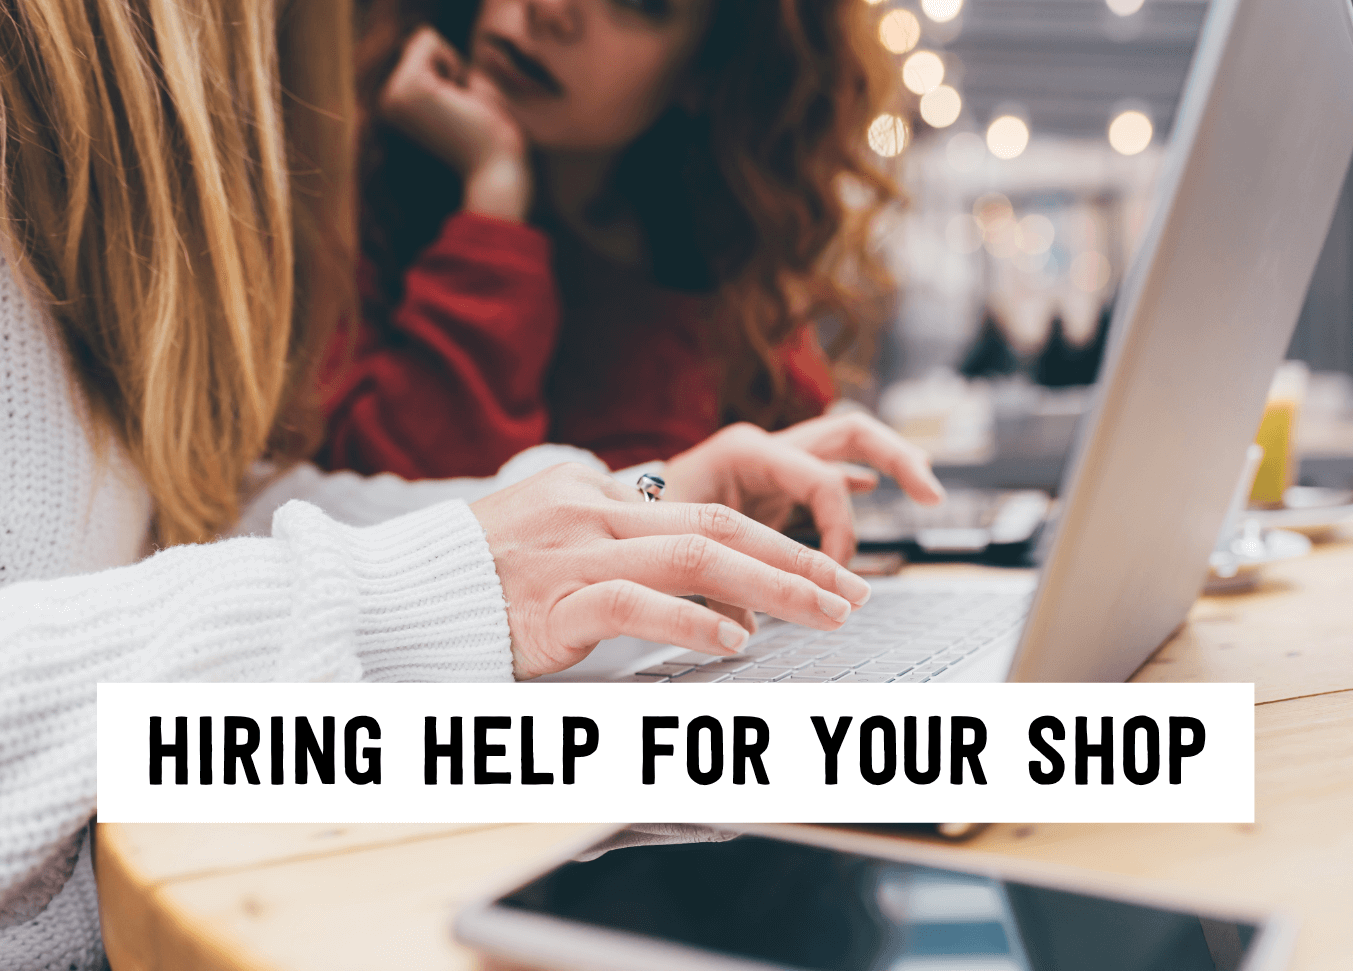 Hiring help for your shop | Tizzit.co - start and grow a successful handmade business